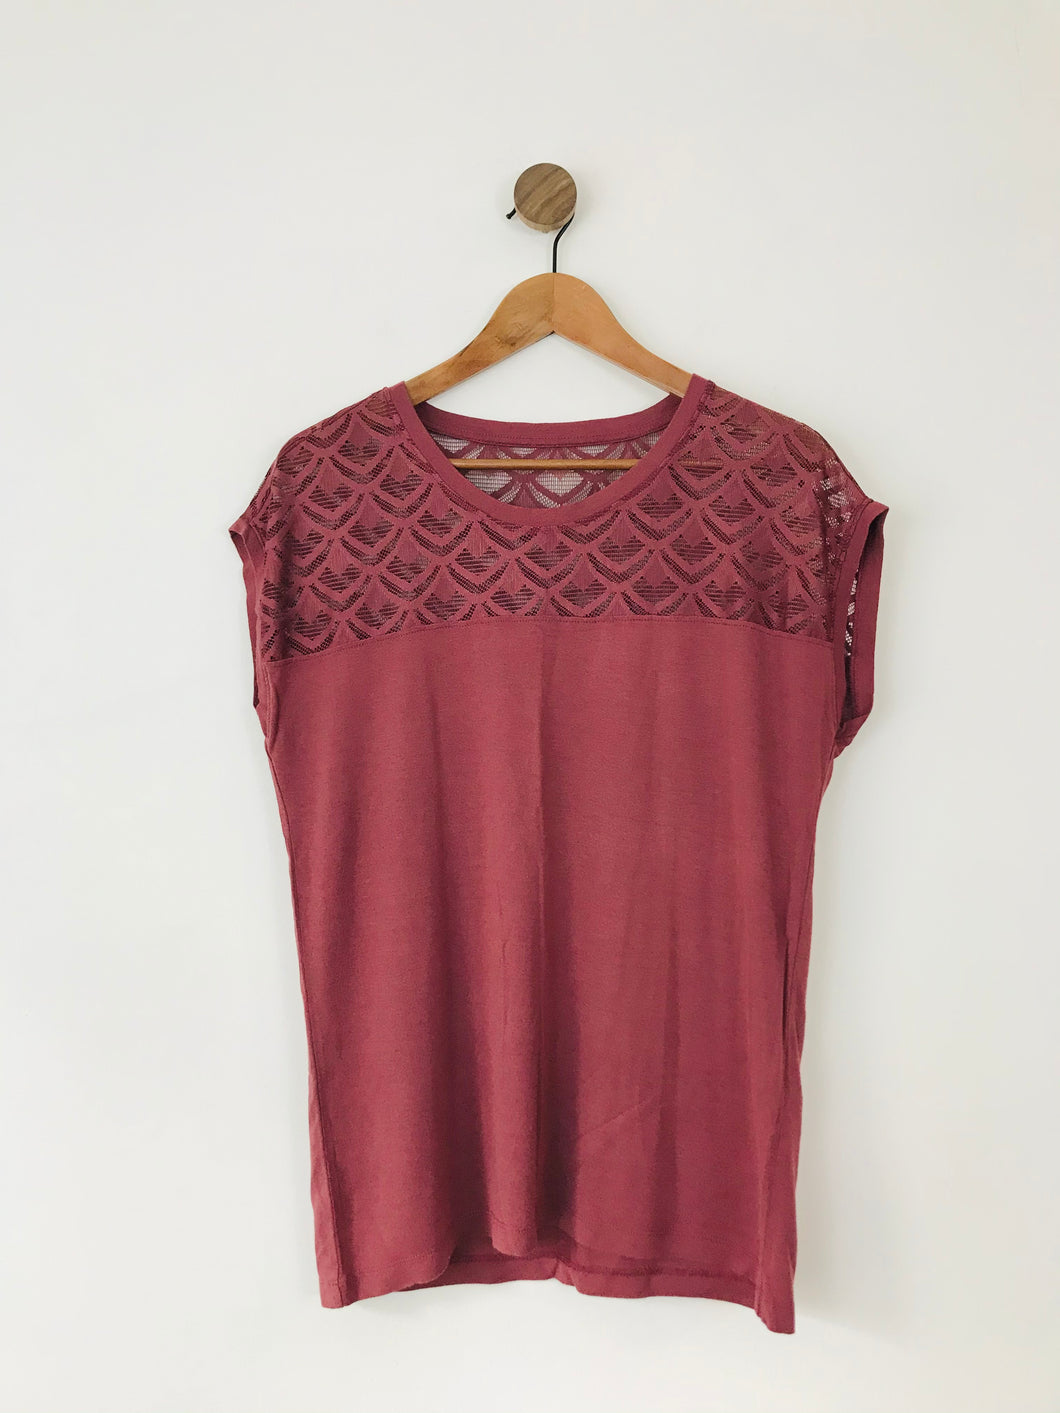 Only Women’s Lace T-Shirt Top | L UK14-16 | Pink